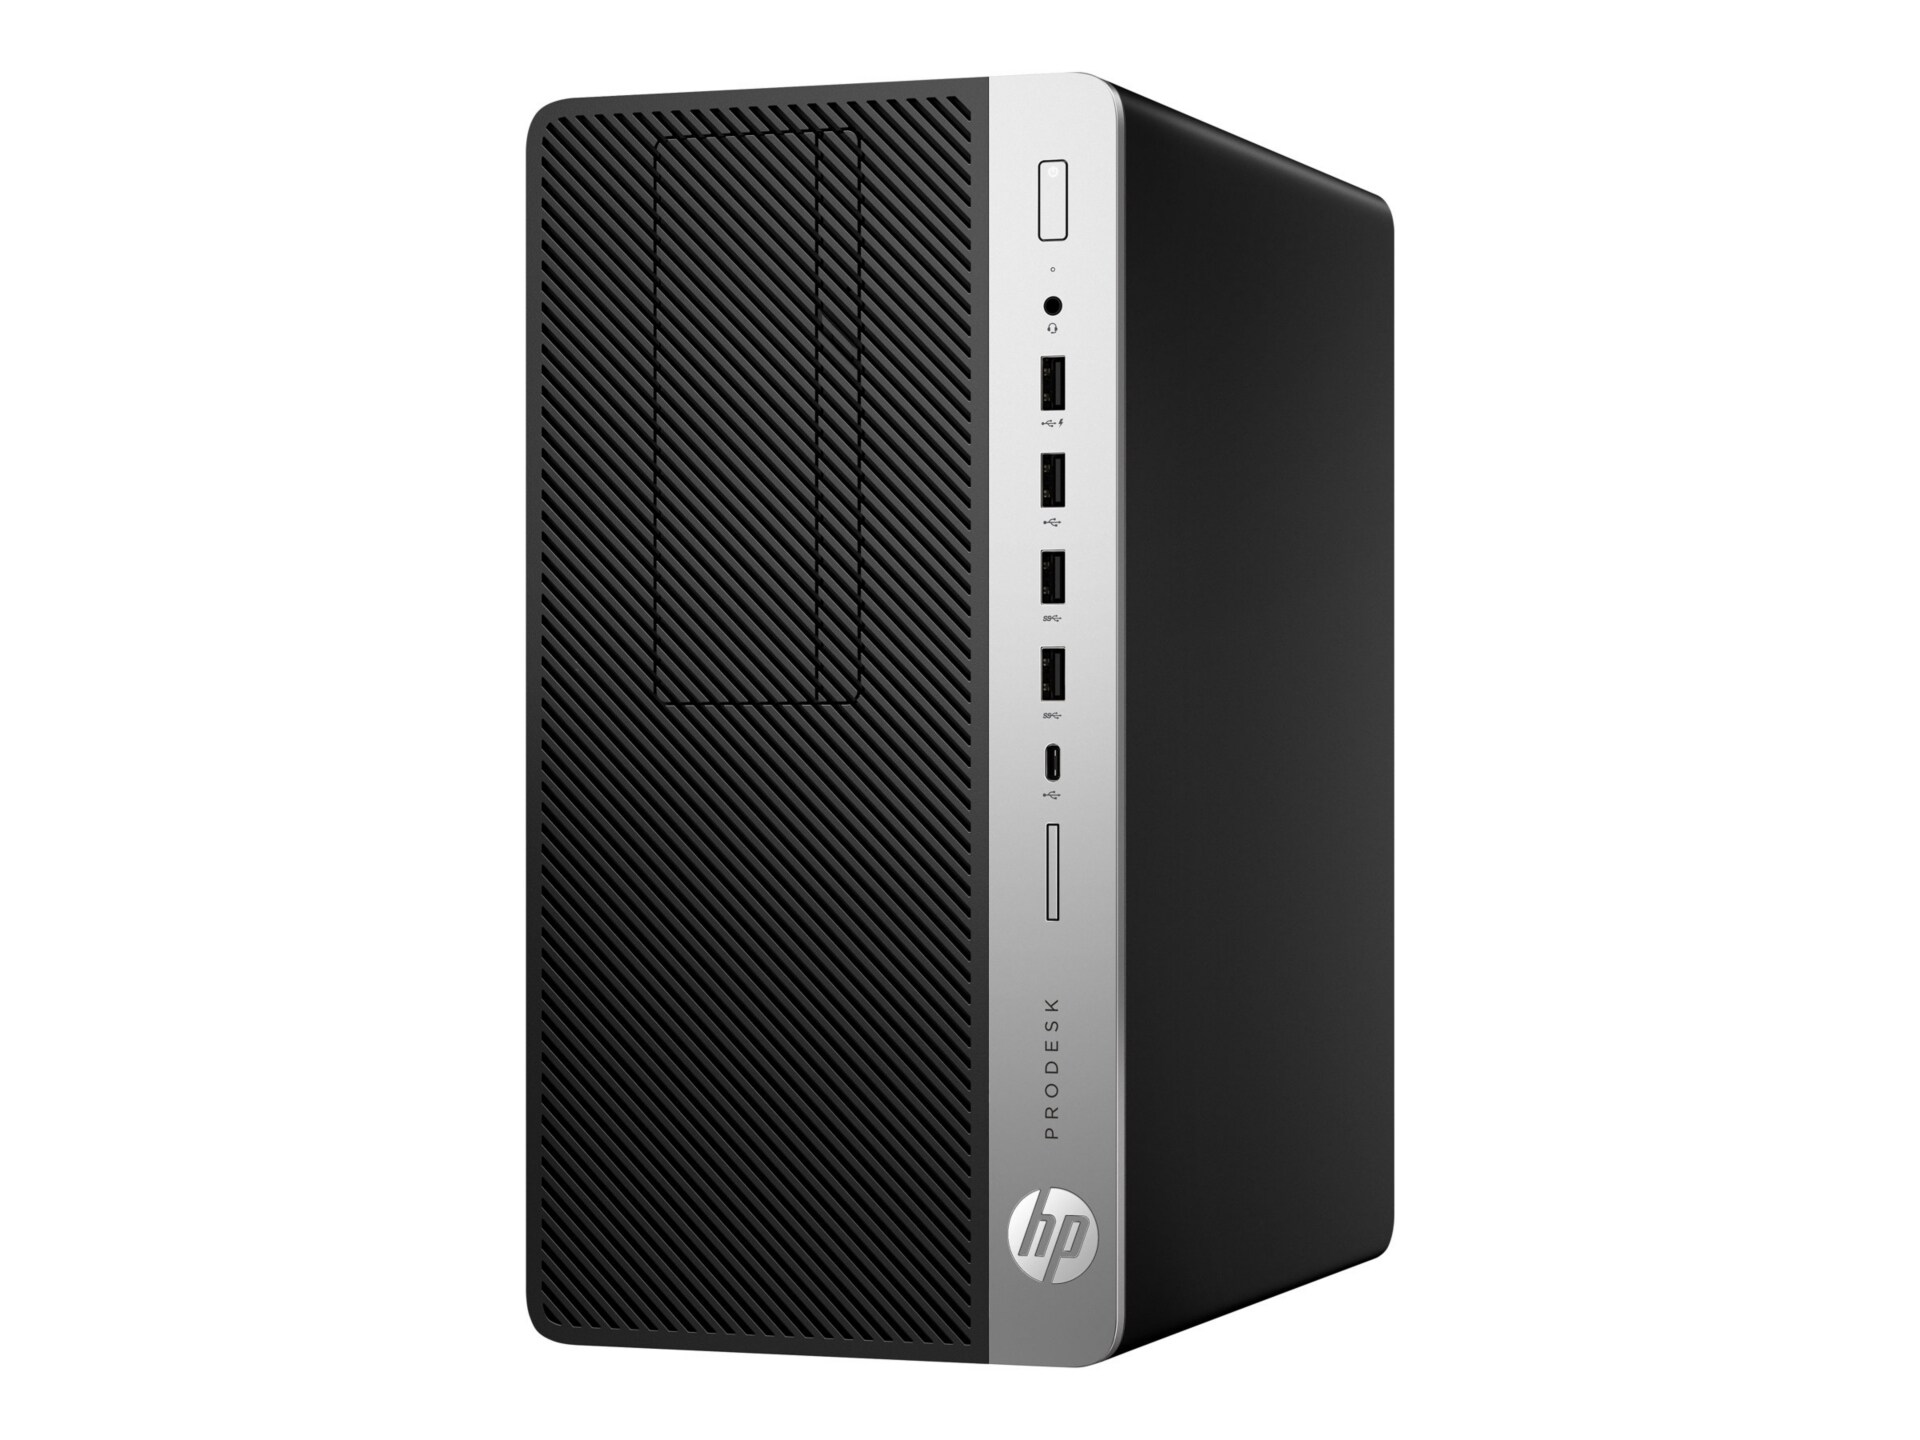 HP ProDesk 600 G3 - micro tower - Core i3 6100 3.7 GHz - 4 GB - 1.5 TB - US